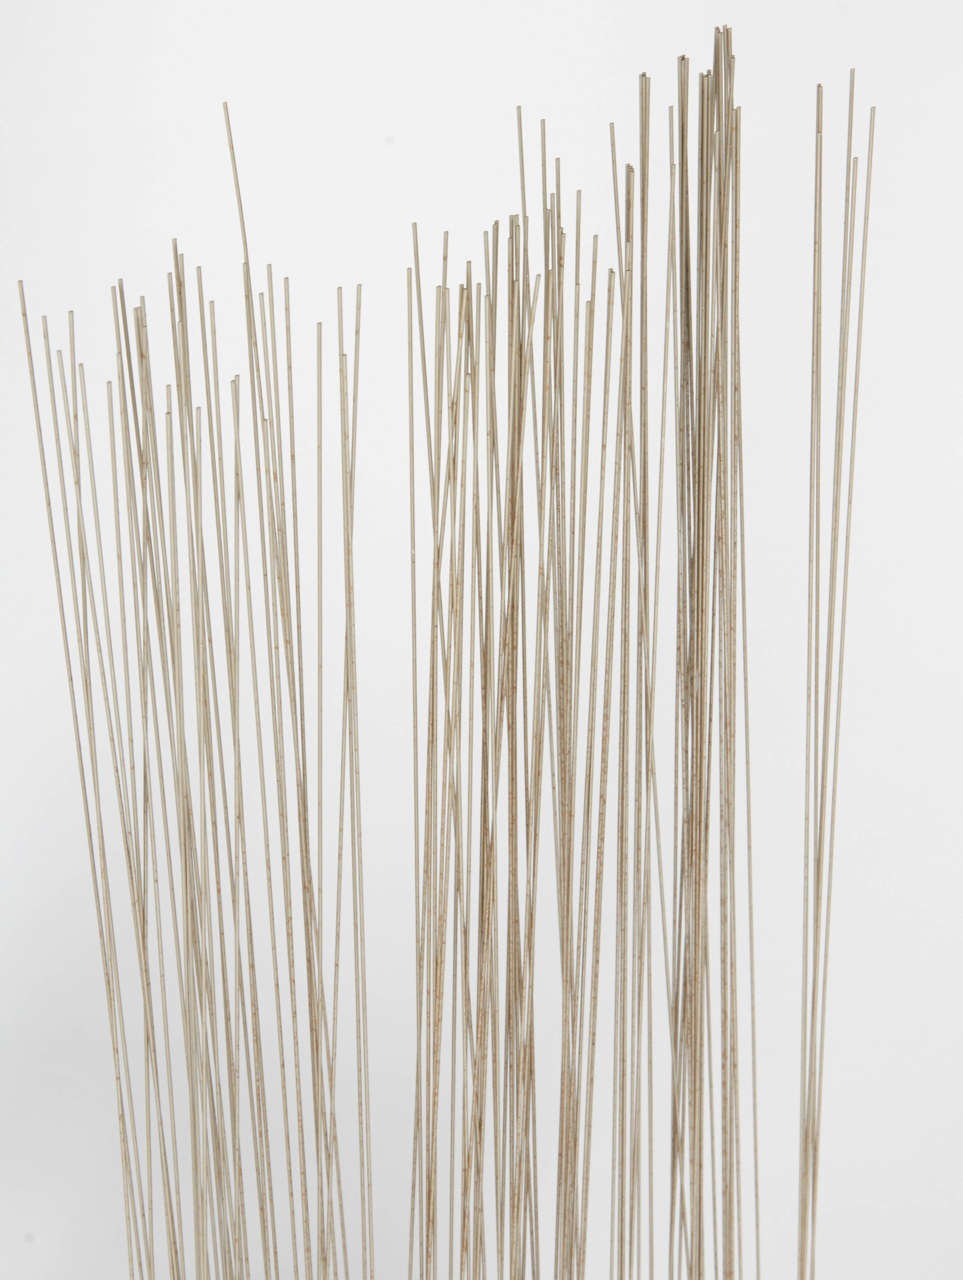 Mid-20th Century Harry Bertoia Early Wire Form Sculpture, 1952